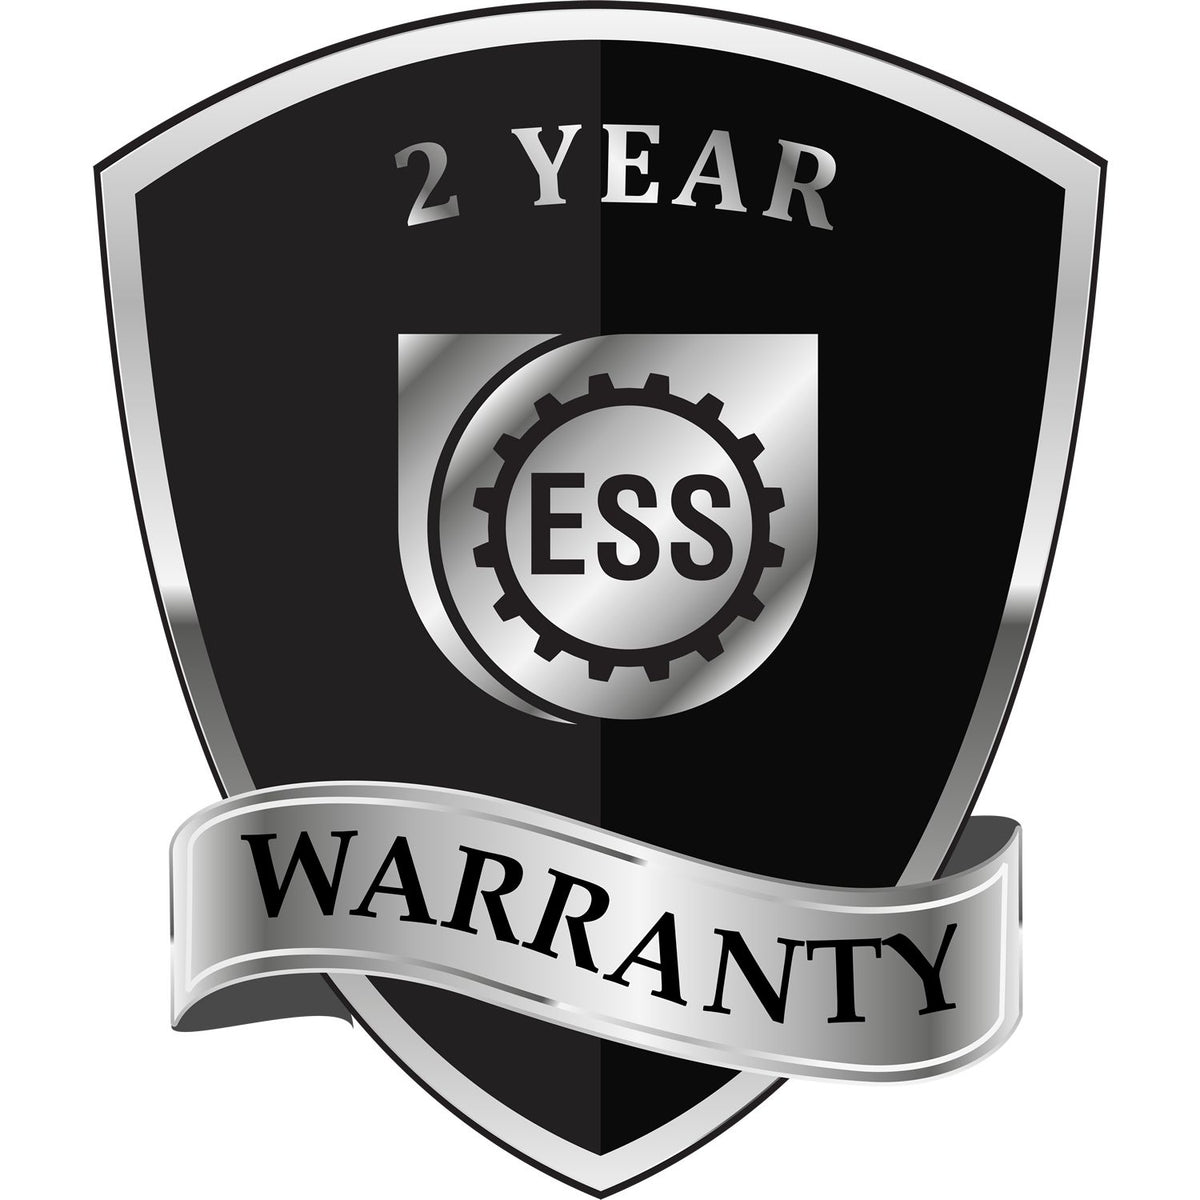 A black and silver badge or emblem showing warranty information for the Gift Georgia Engineer Seal